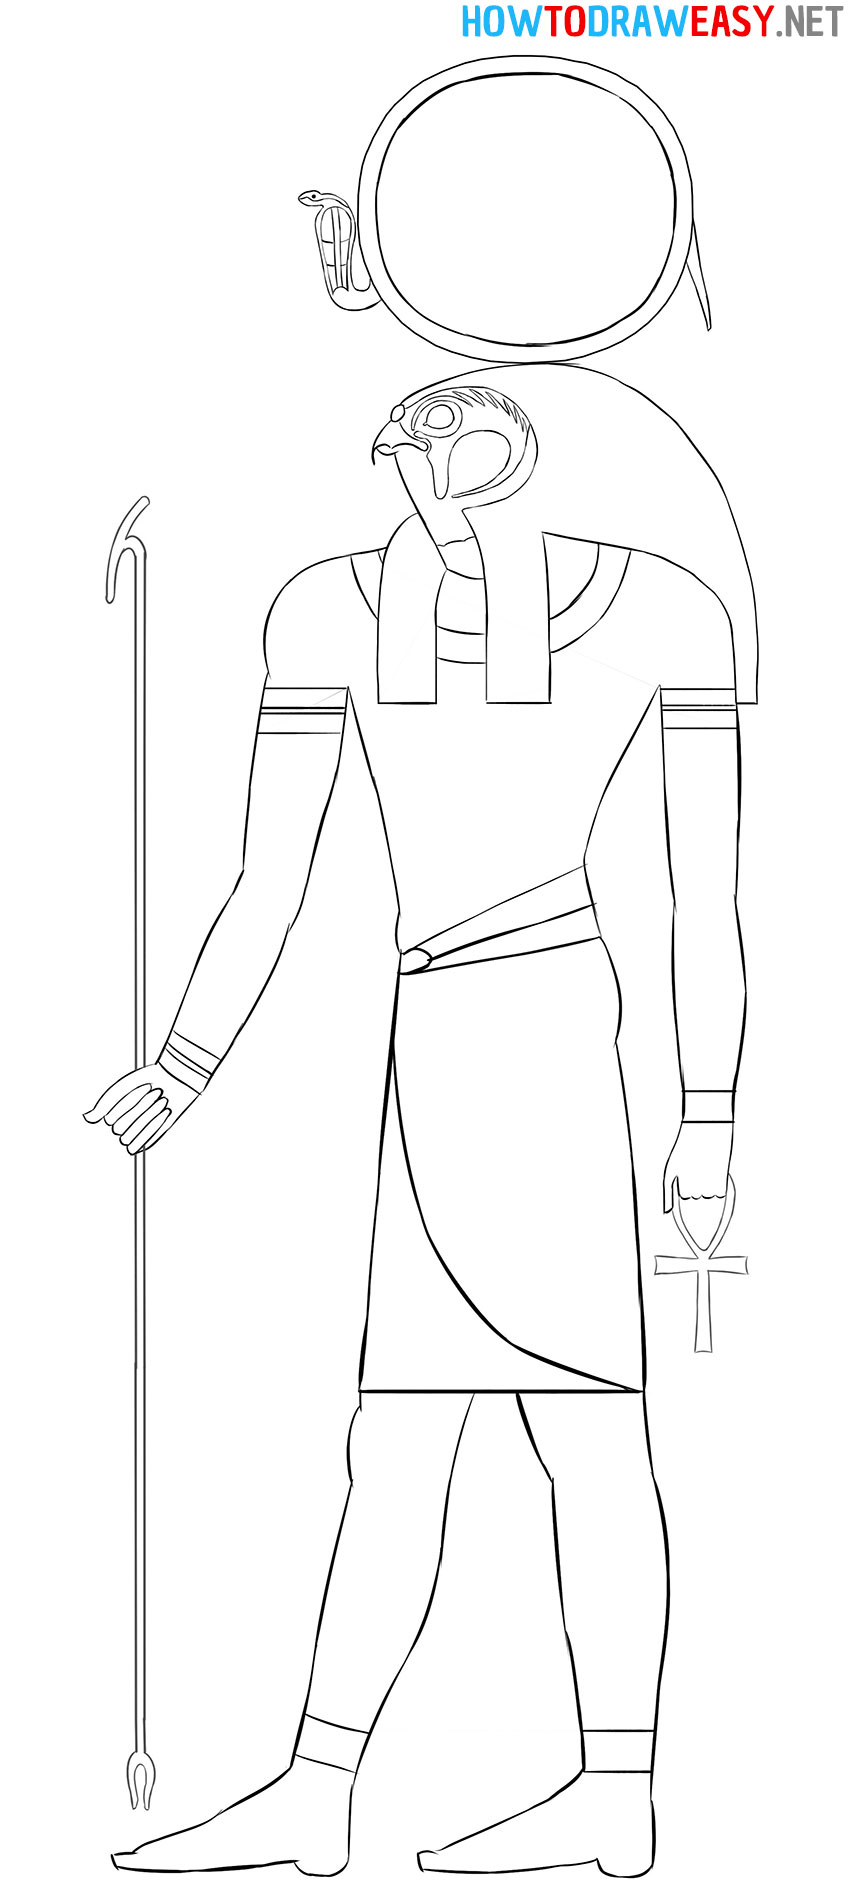 How to draw the Egyptian god Ra